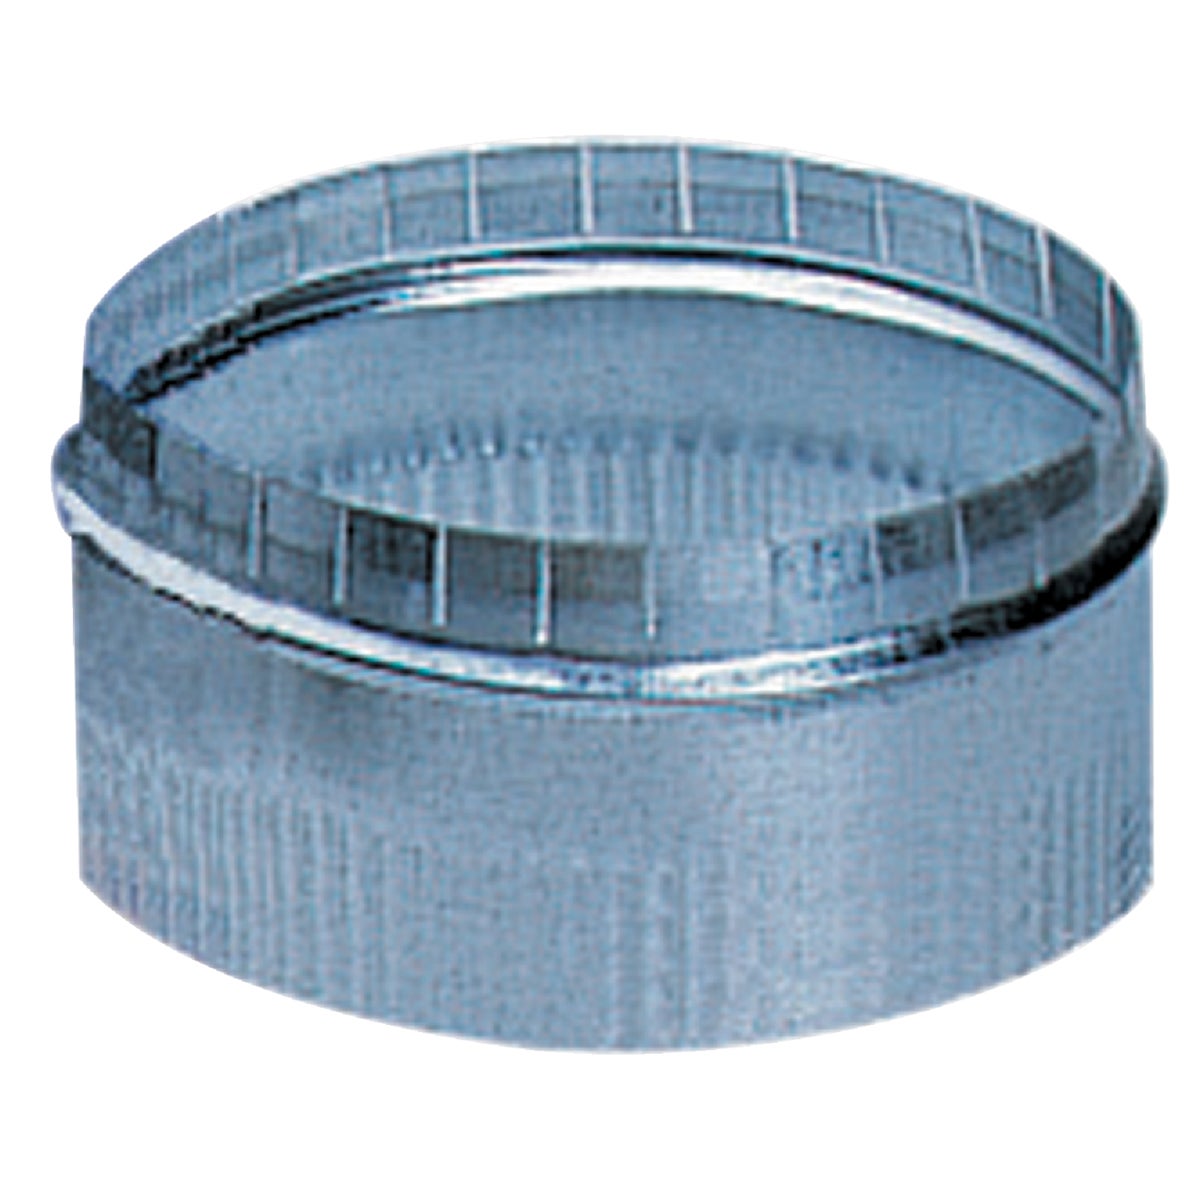 Item 436682, For flexible duct. Connector into main trunk line. 4 In.<br>
<br><b>No. GV2303:</b> Diameter: 4 In., Pkg Qty: 1